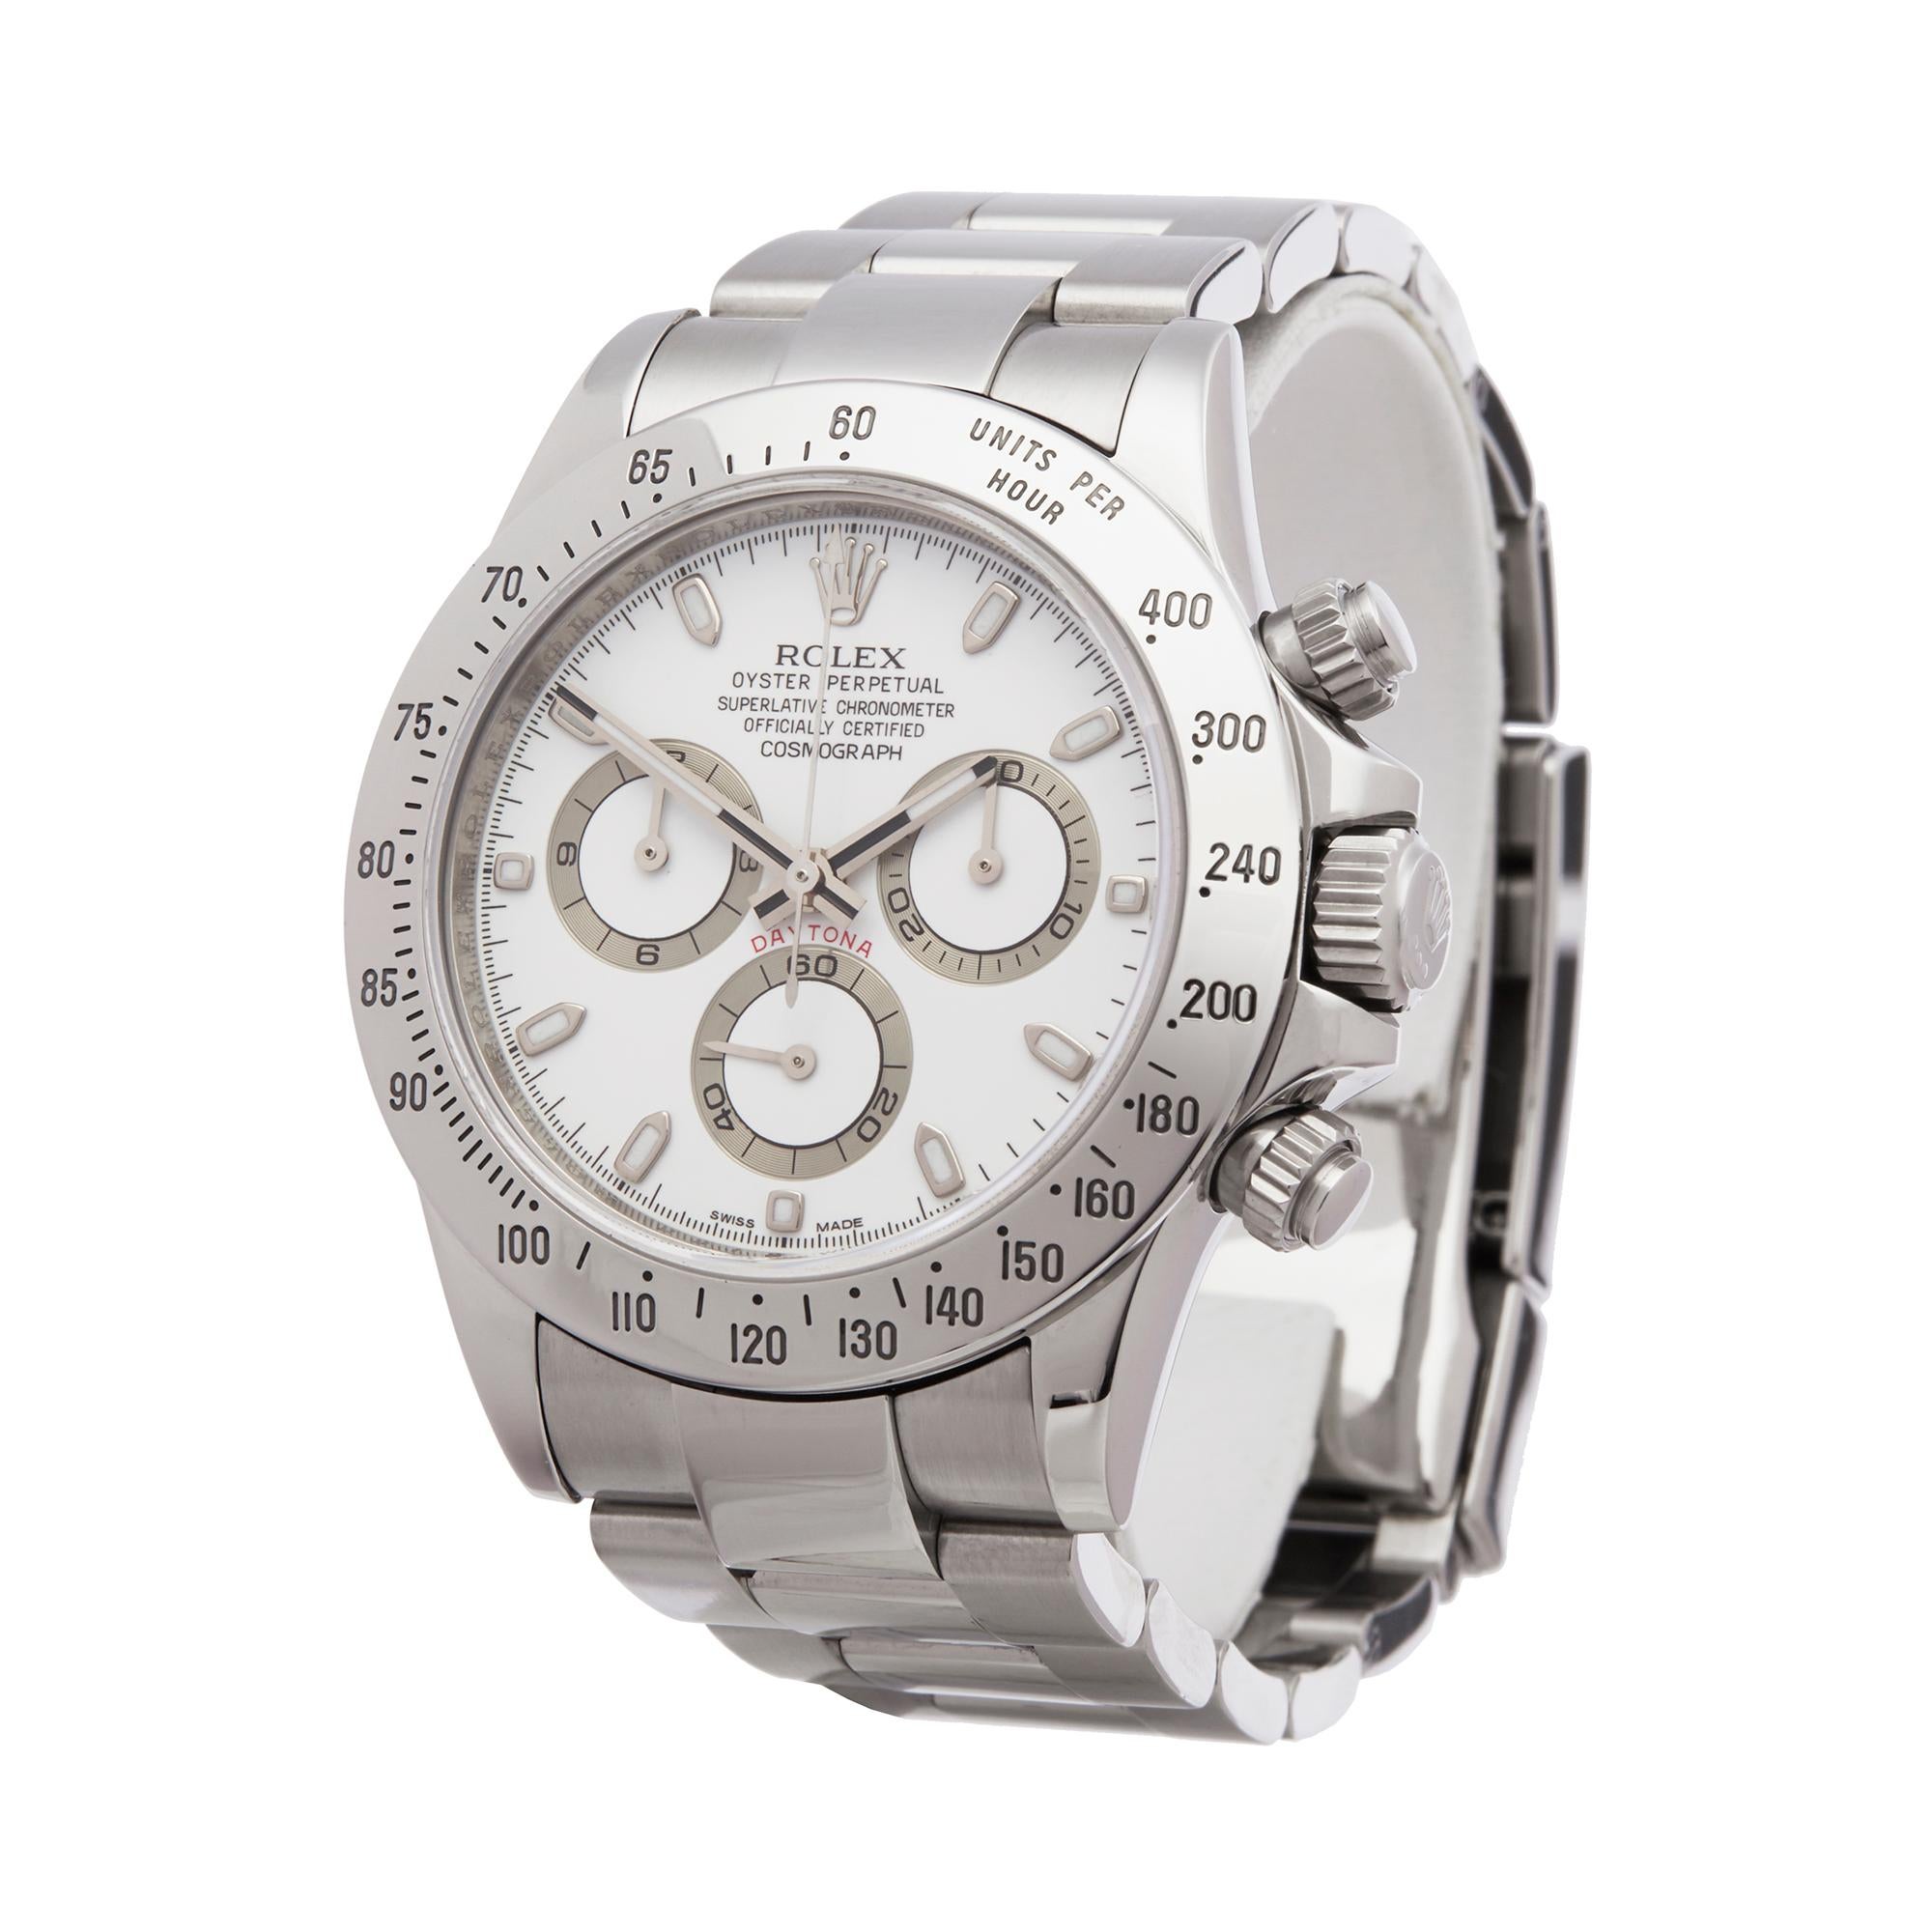 Ref: W5778
Manufacturer: Rolex
Model: Daytona
Model Ref: 116520
Age: 27th April 2011
Gender: Mens
Complete With: Box & Guarantee
Dial: White Baton
Glass: Sapphire
Movement: Automatic
Water Resistance: To Manufacturers Specifications
Case: Stainless